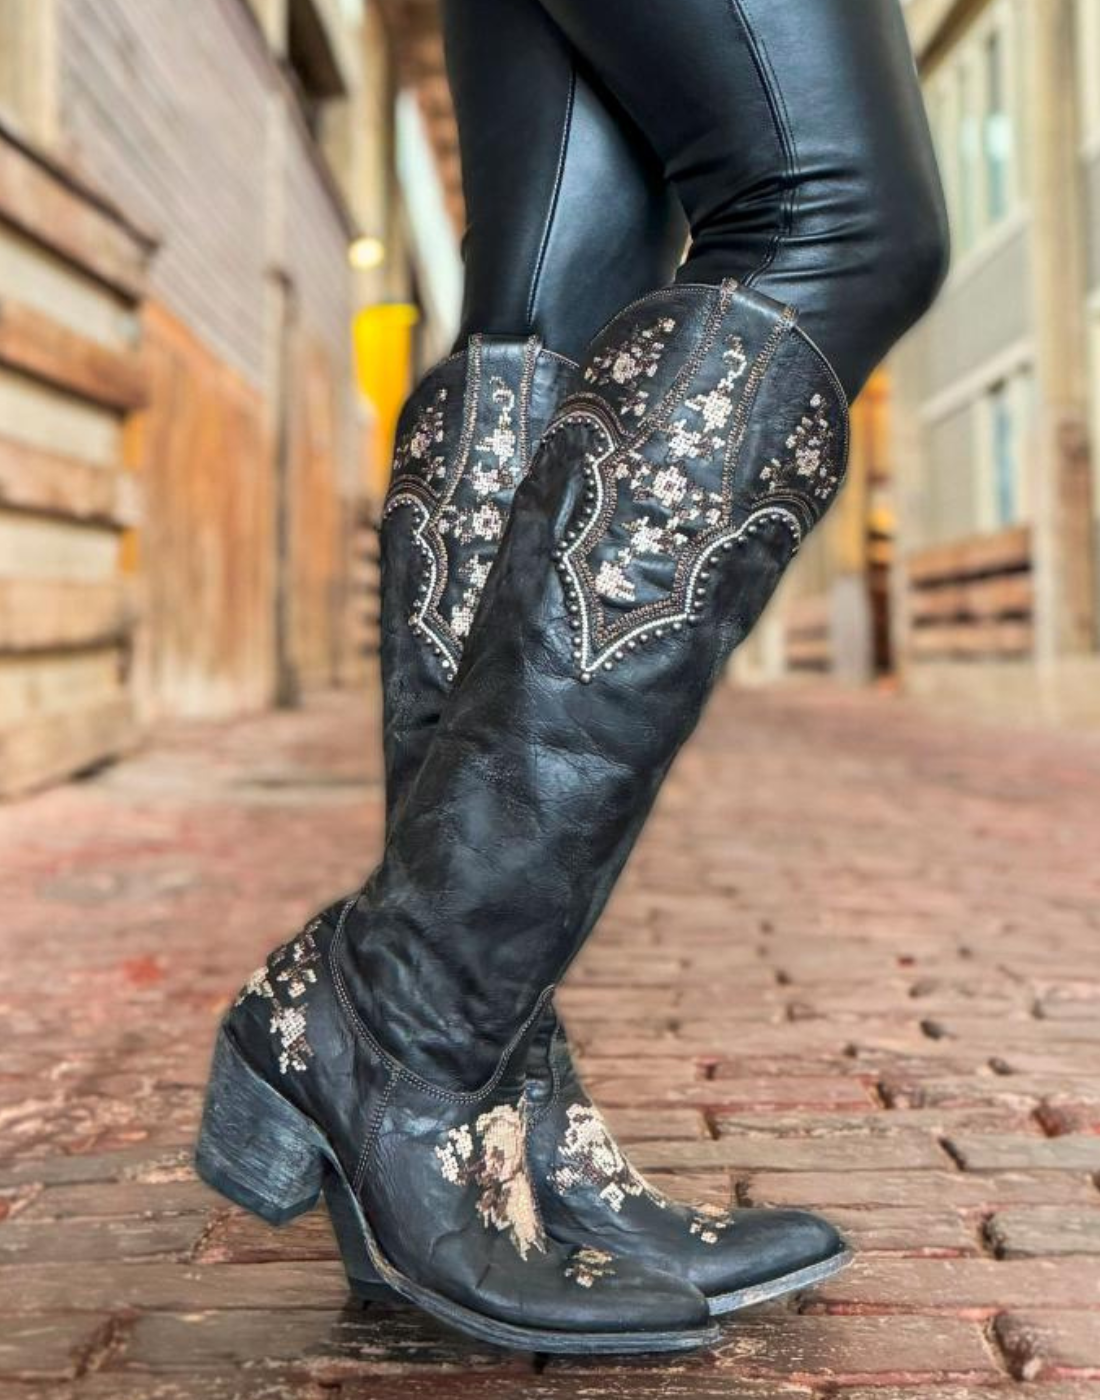 Women Boots Skulls Ladies High Boots High Heels Long Boots Women Shoes -  China Lady Shoes and Women Shoes price